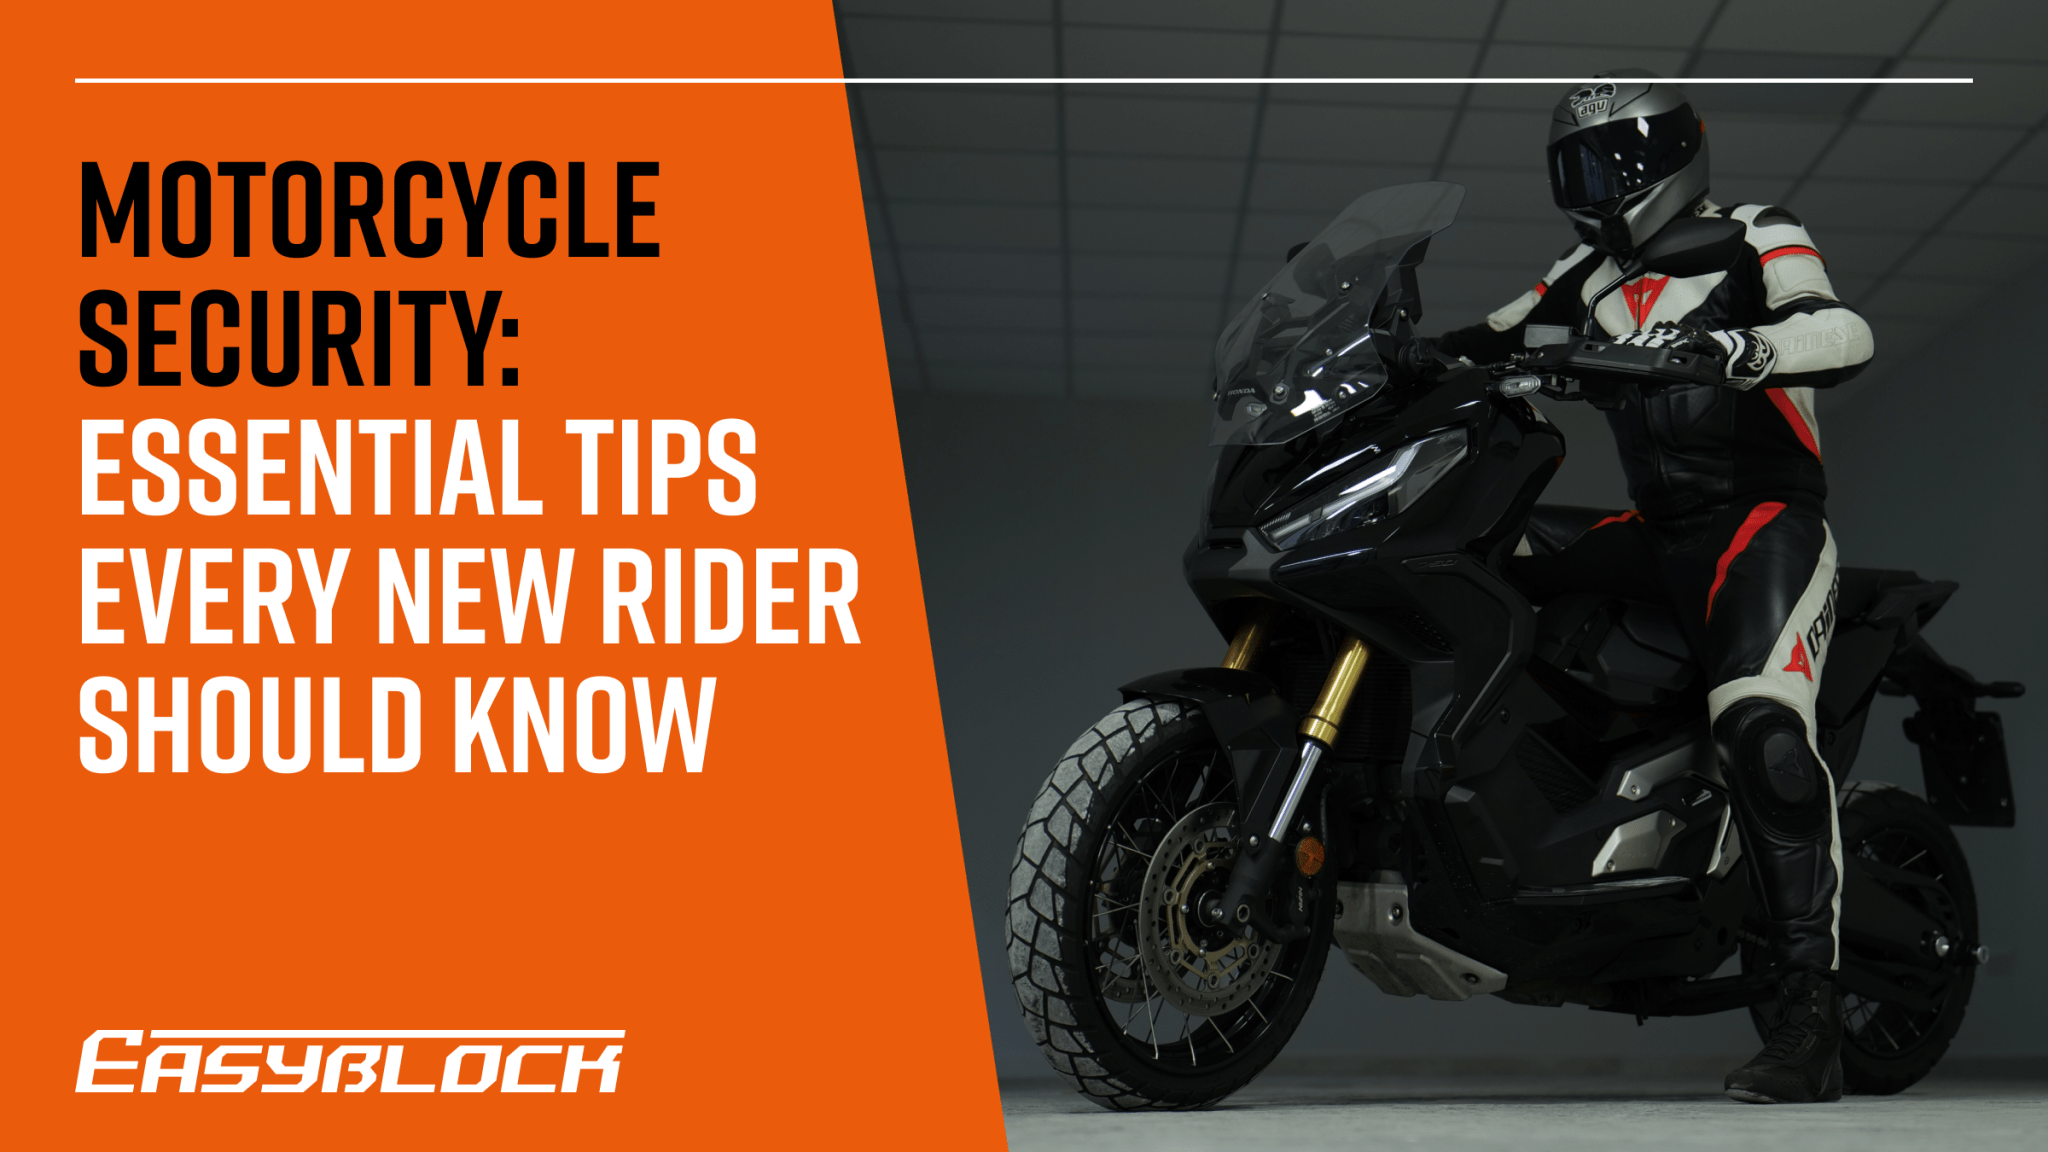 Motorcycle Security: Essential Tips Every New Rider Should Know